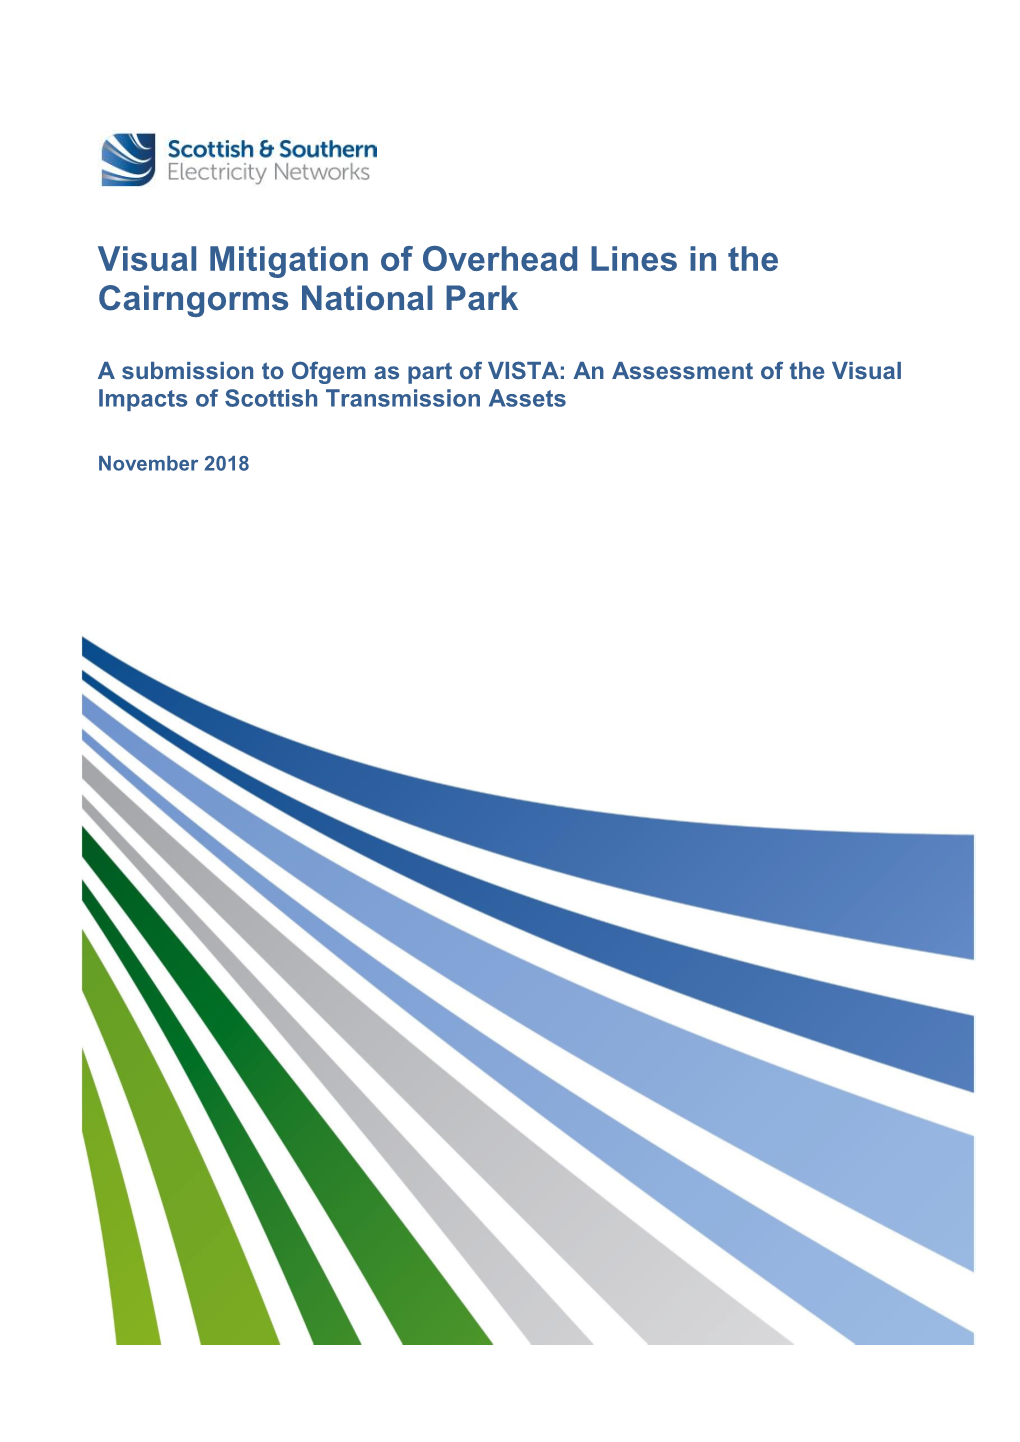 Visual Mitigation of Overhead Lines in the Cairngorms National Park